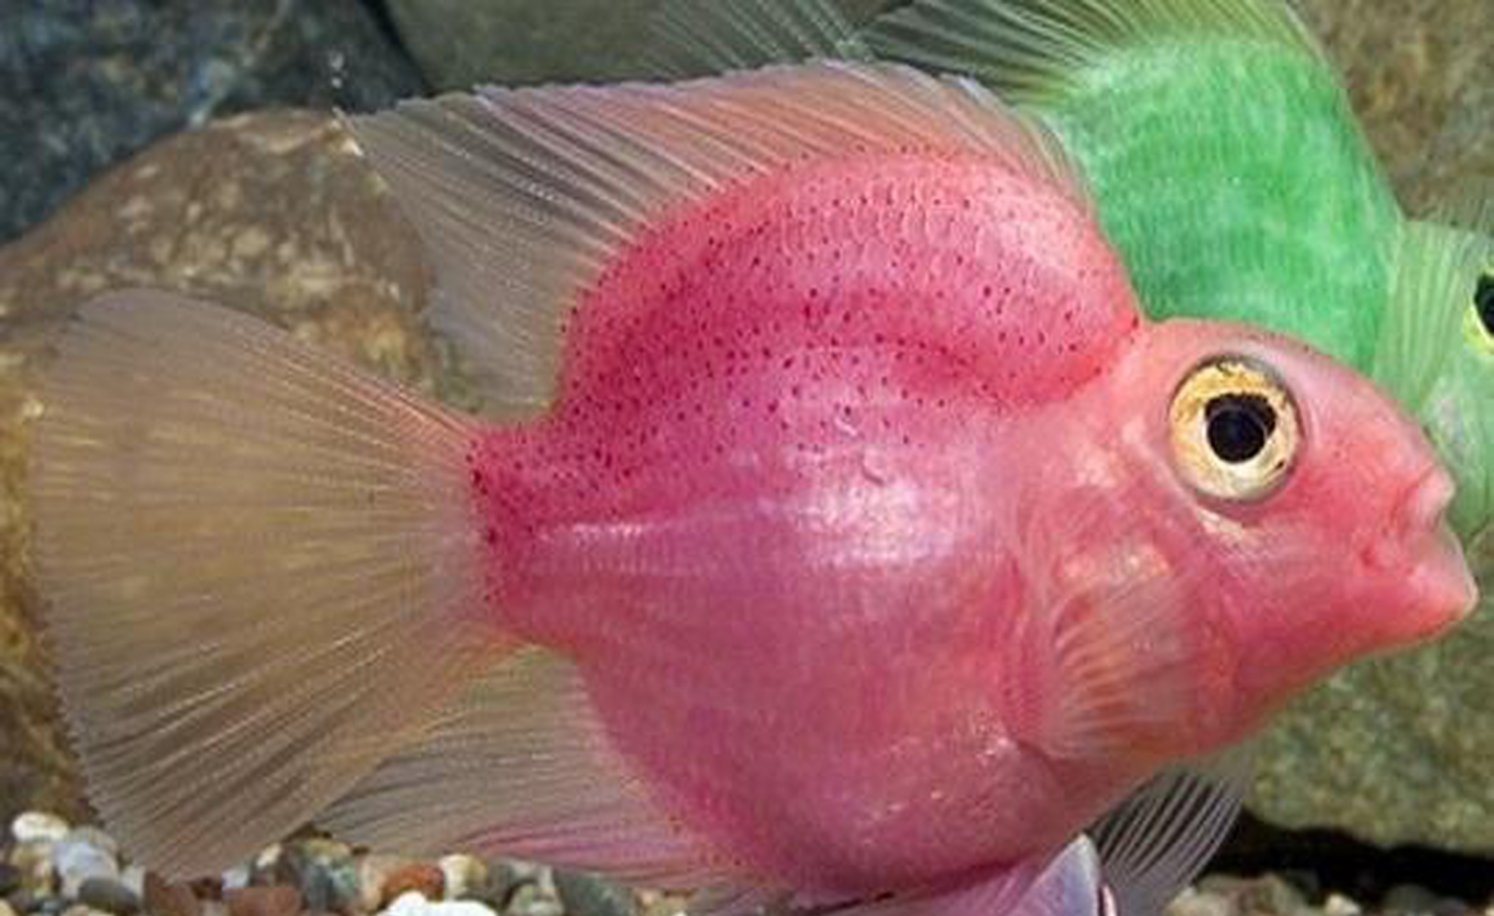 x2 Package - Pink Jellybean Parrot Cichlid Sml 1"- 1 1/2" Each-Cichlid - Miscellaneous-www.YourFishStore.com